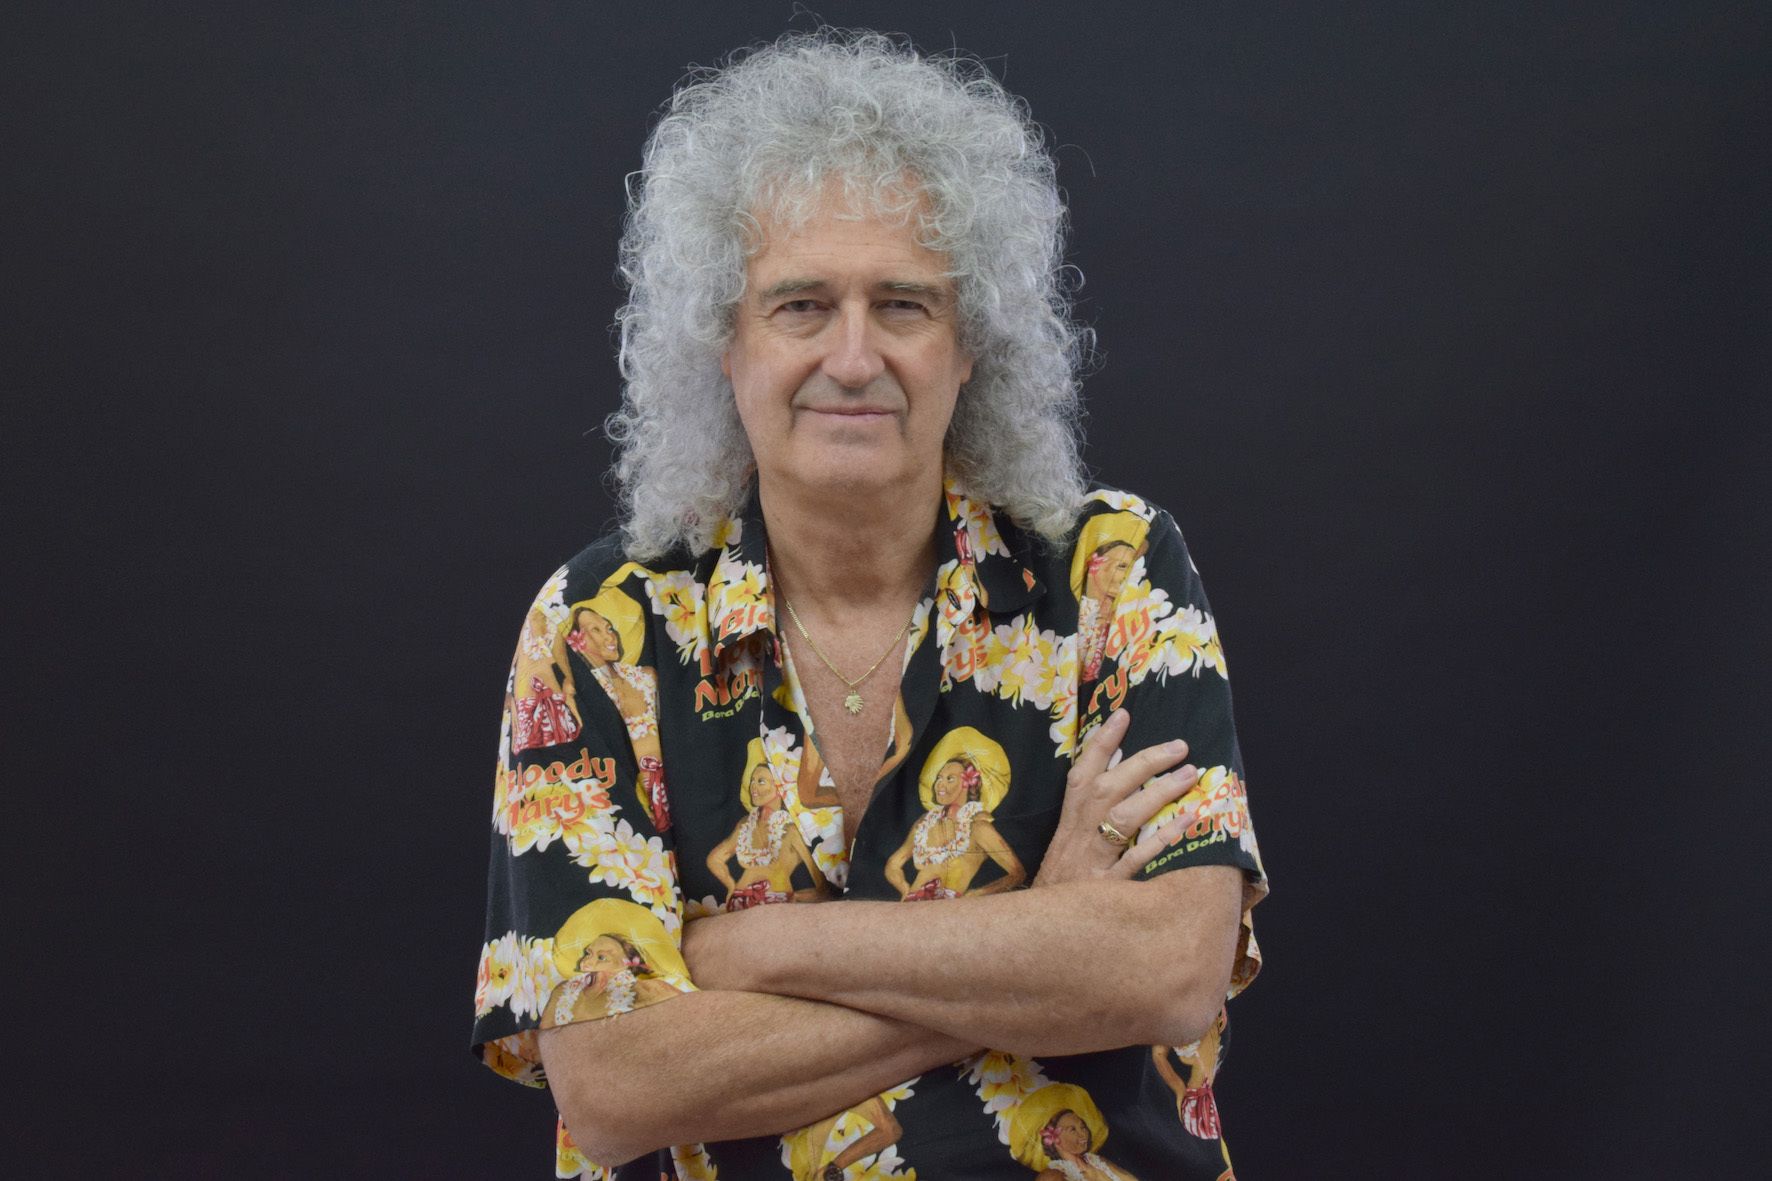 Brian May Wallpaper Image Photo Picture Background